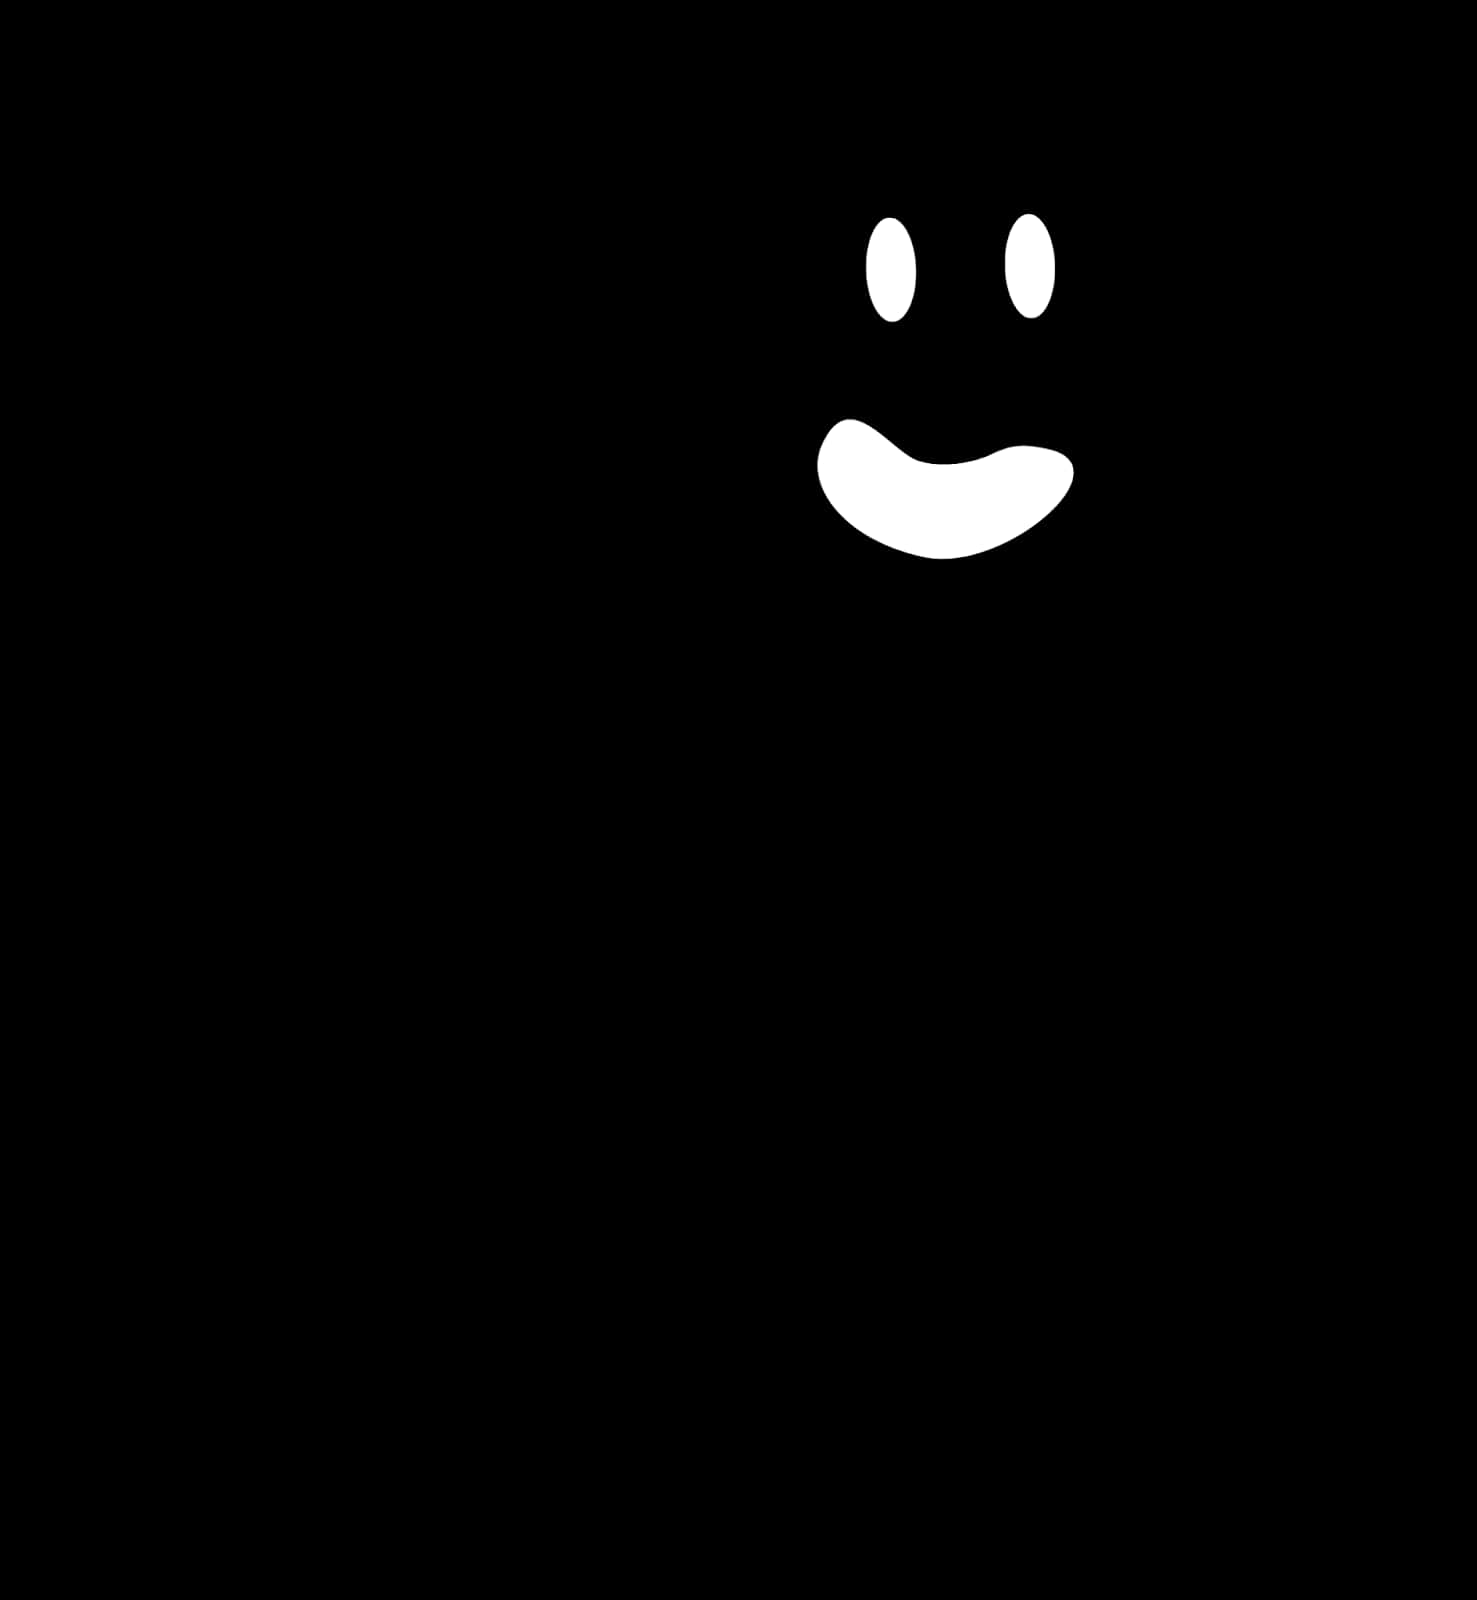 Smiling Ghost Faceon Black Background PNG